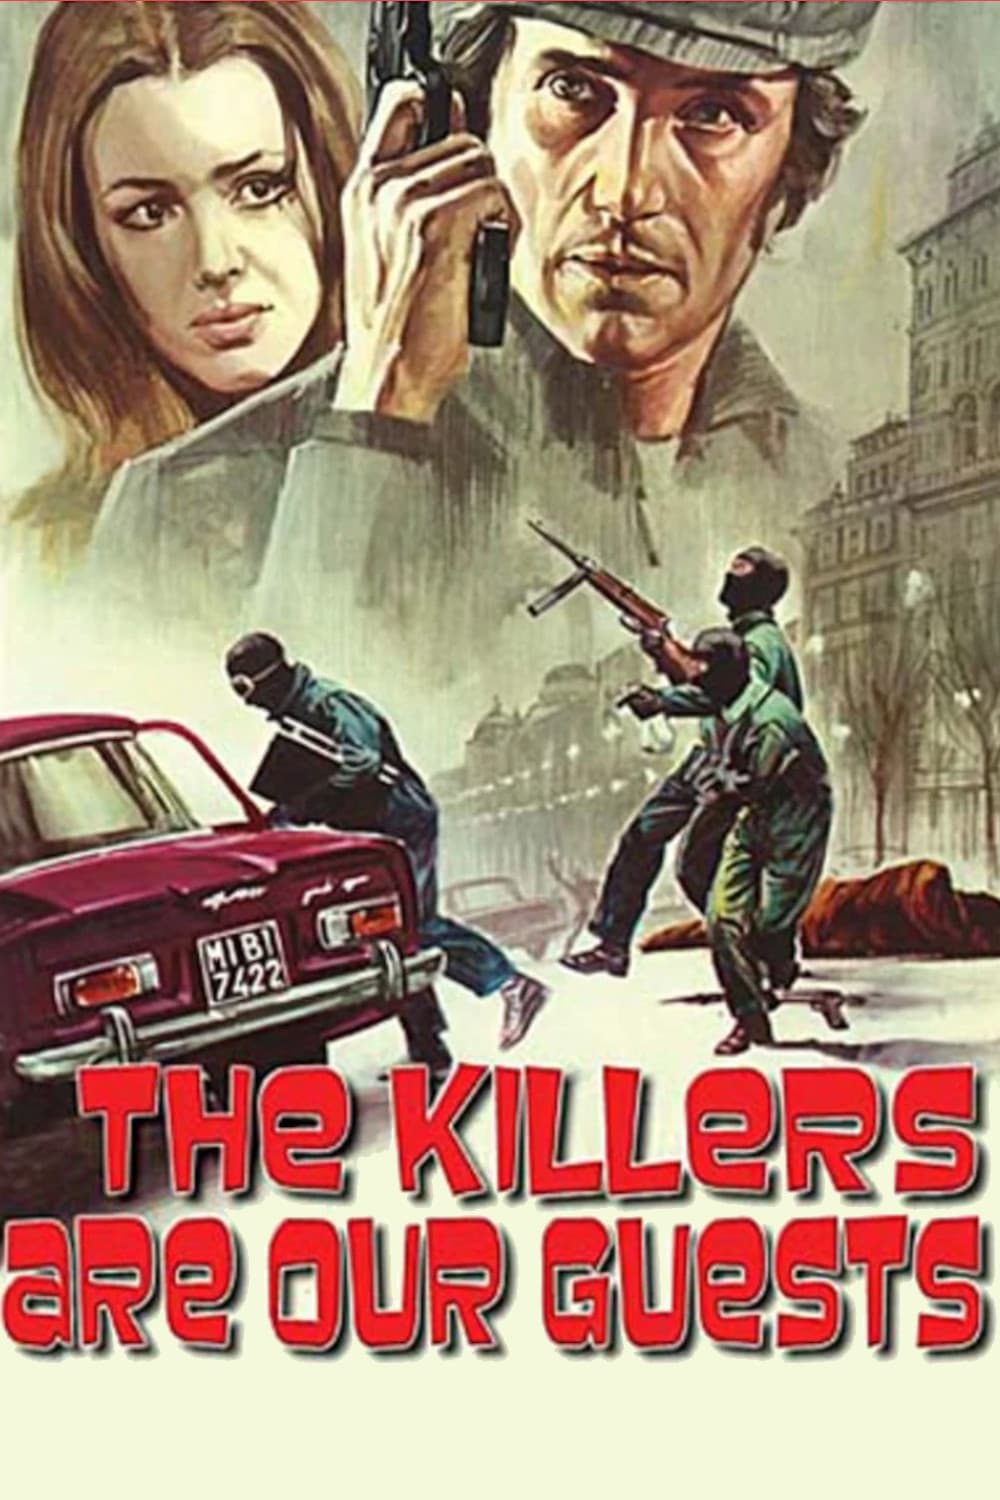 The Killers Are Our Guests (1974)